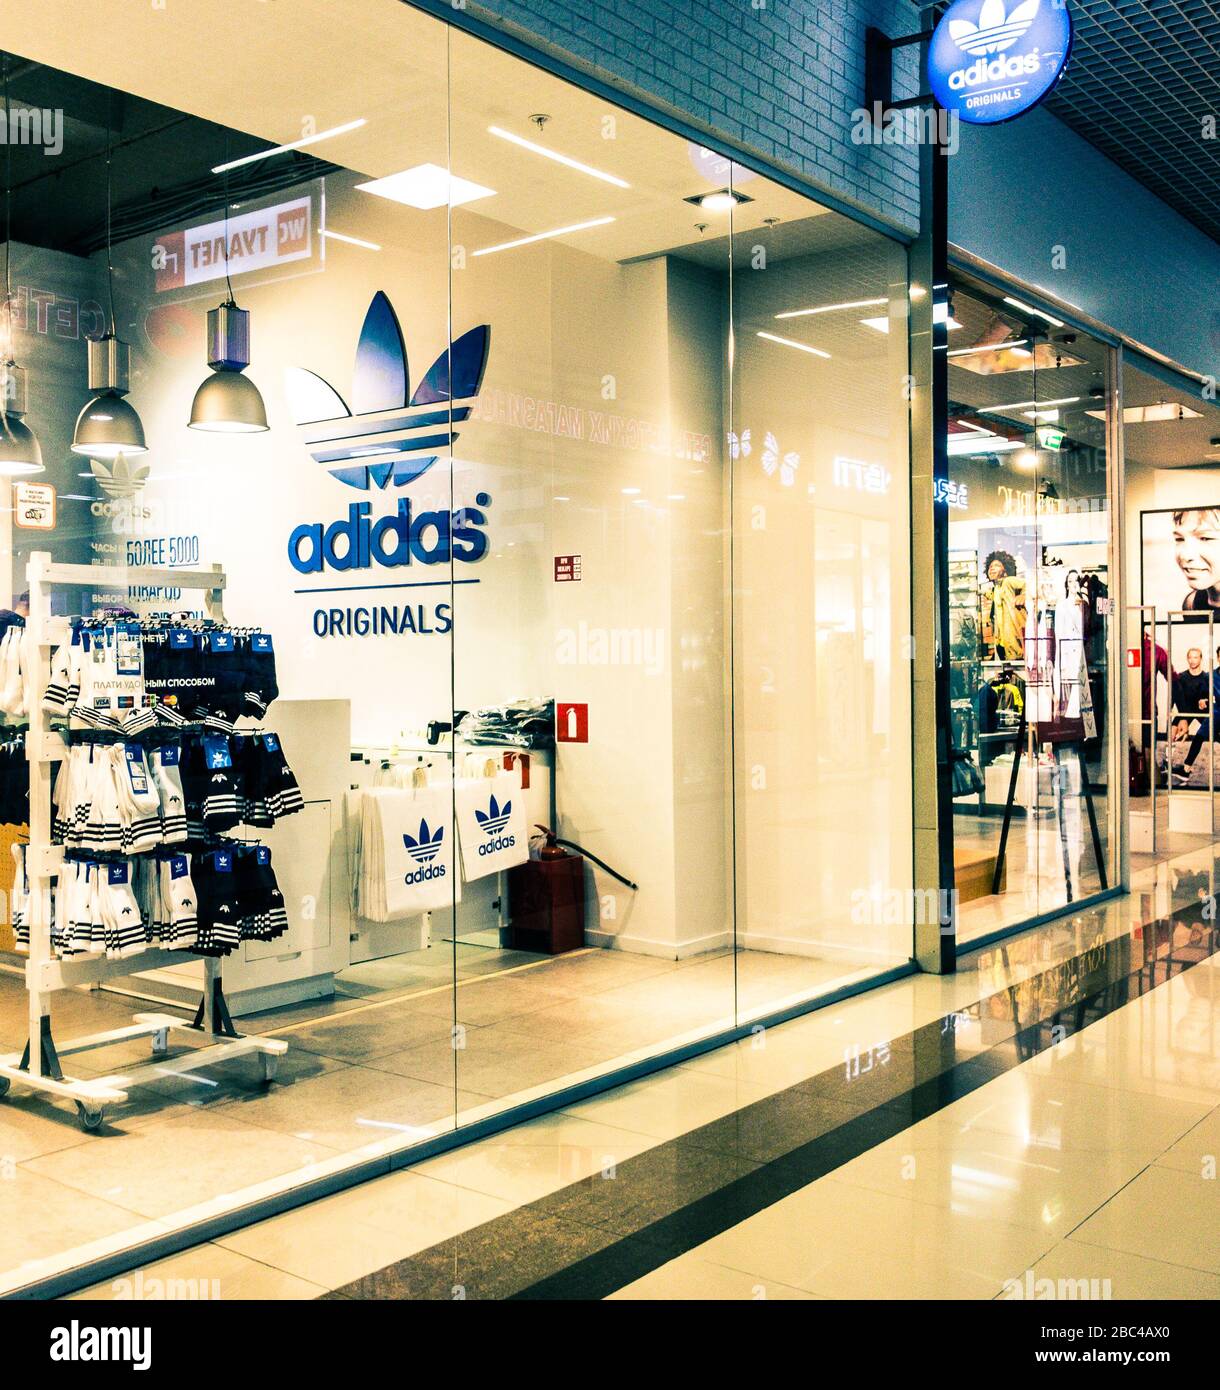 Adidas Originals High Resolution Stock Photography and Images - Alamy